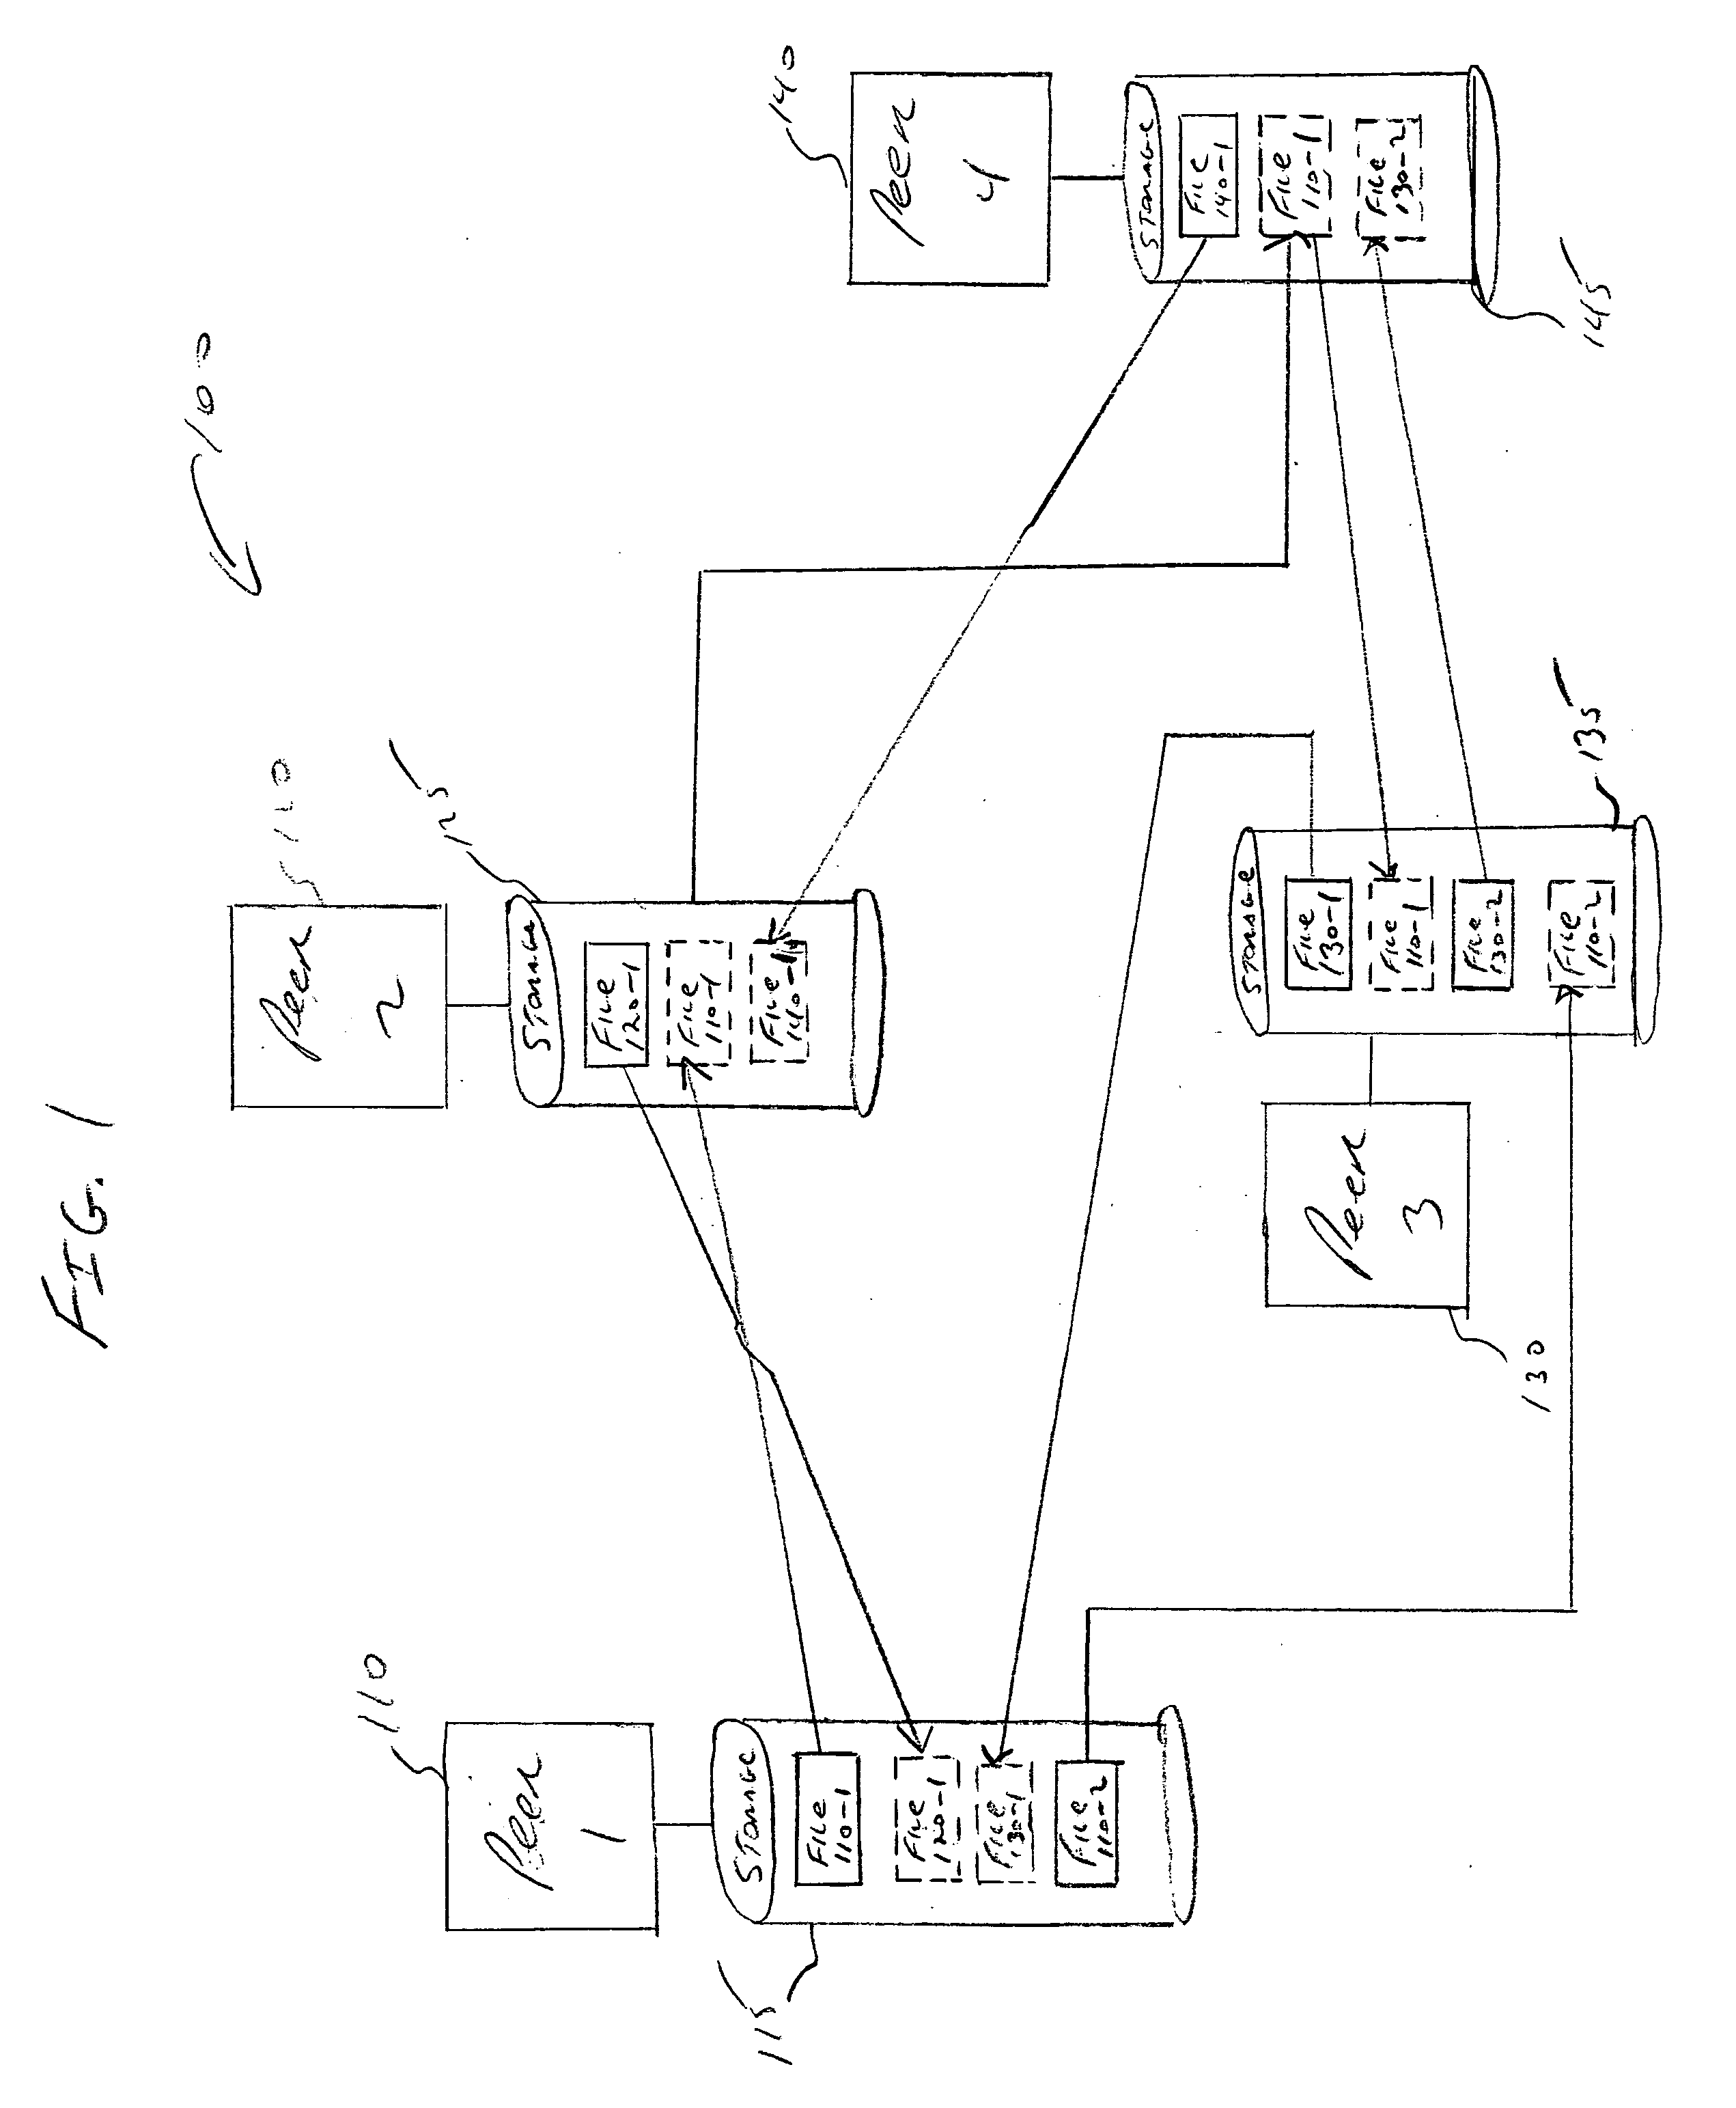 Method and apparatus for providing data storage in peer-to peer networks